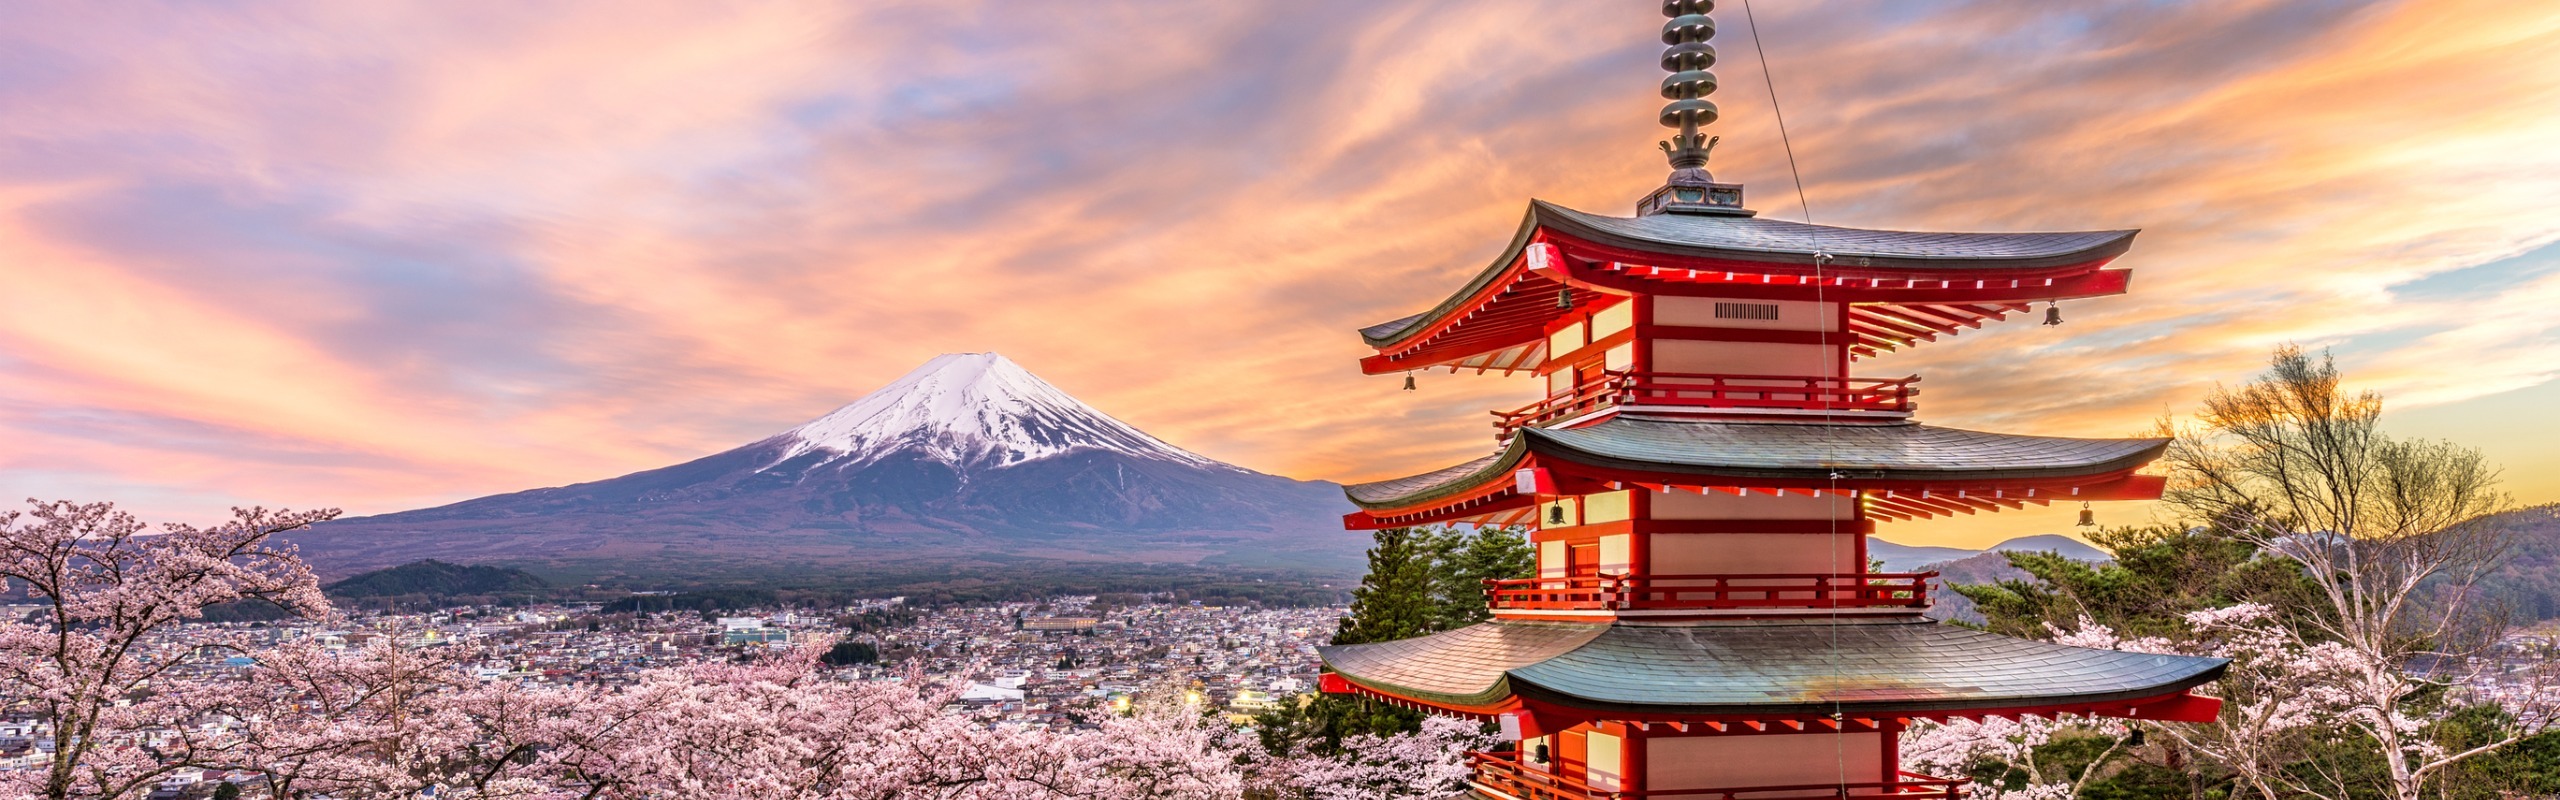 How Long to Spend in Japan: From 1 week to 4 weeks